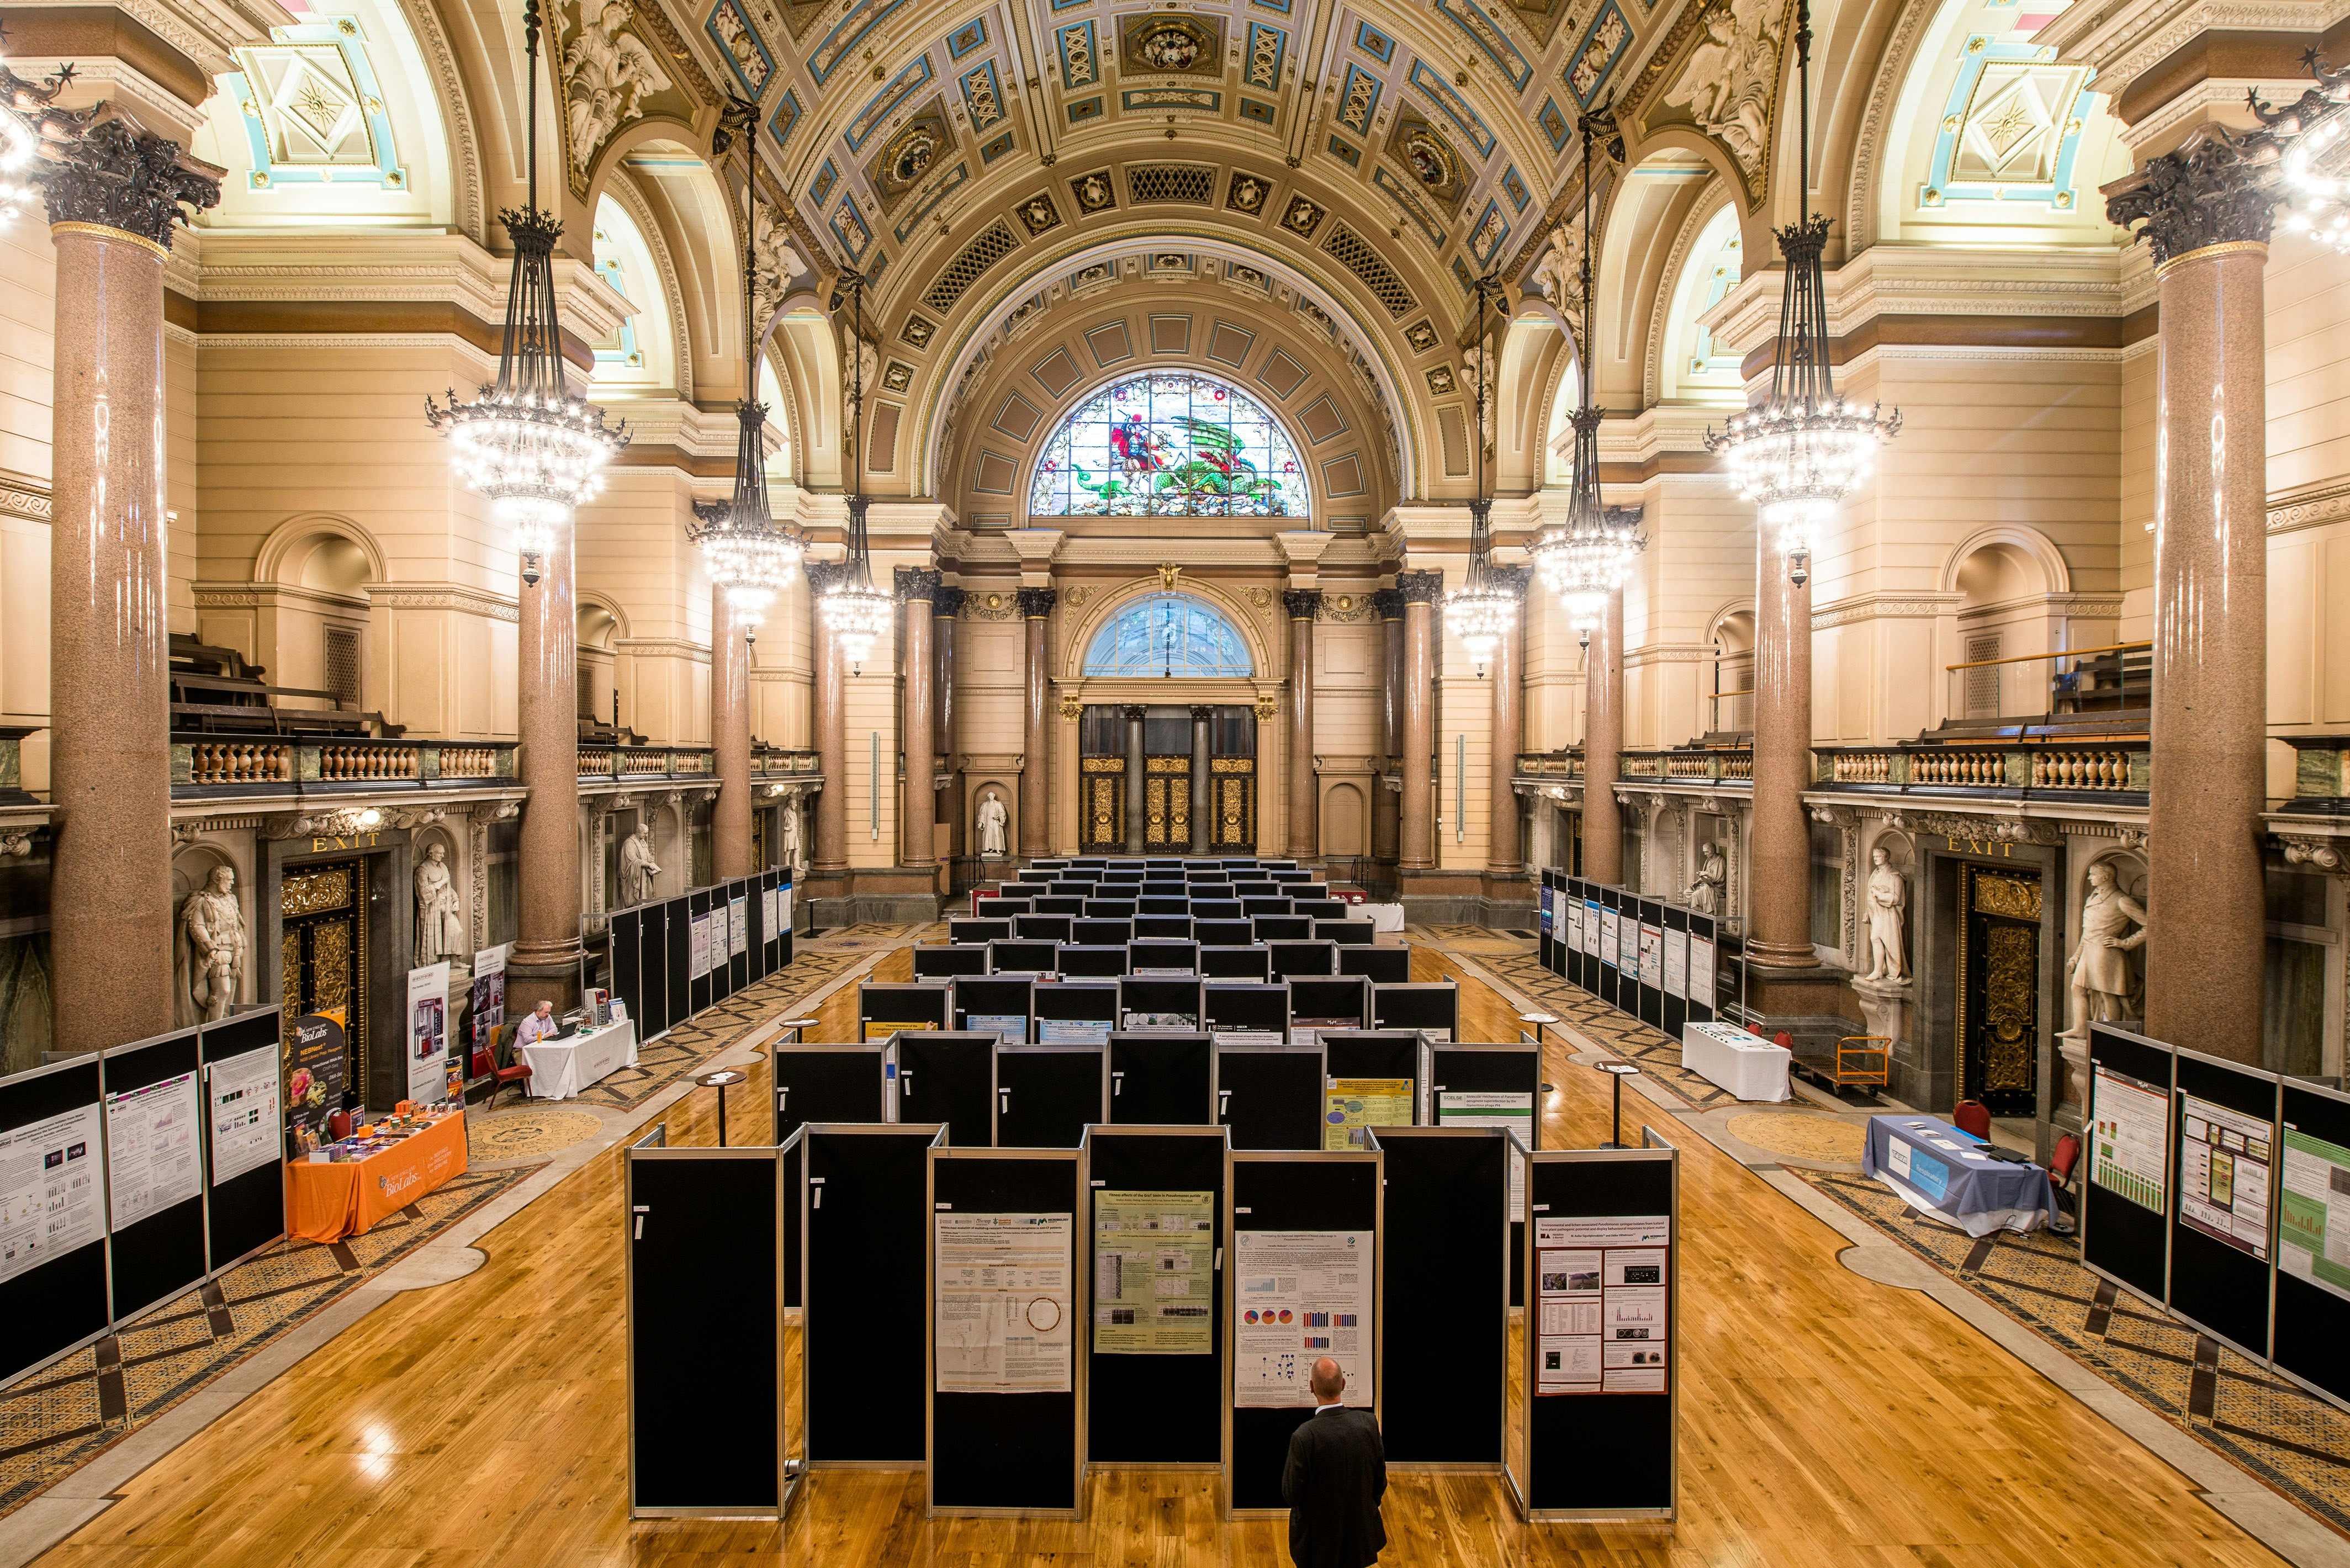 Formal Event Venues in Liverpool - St George's Hall